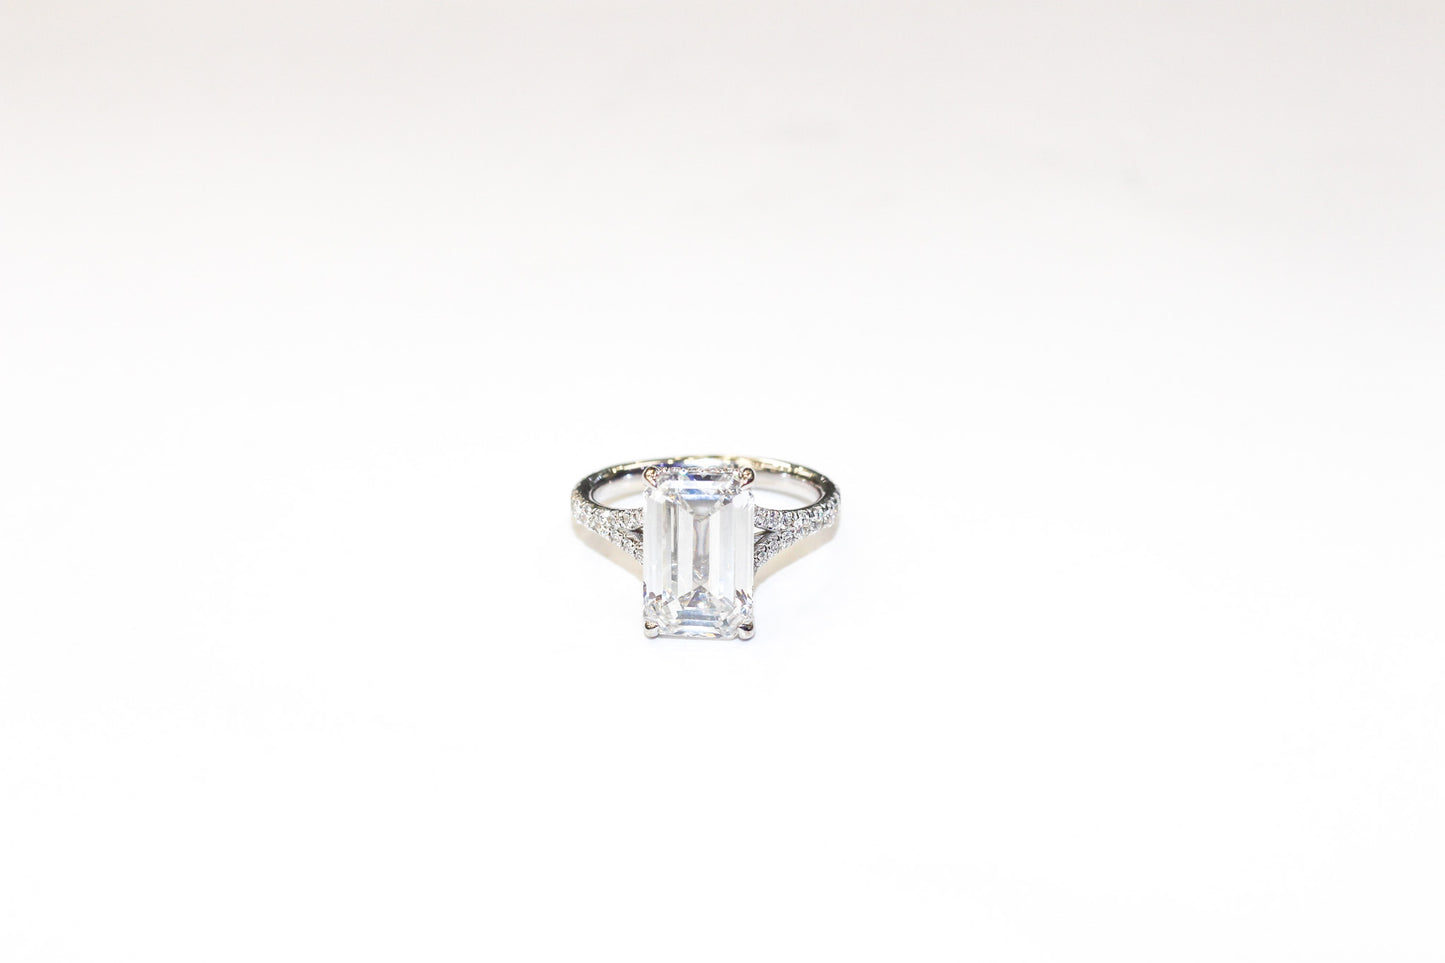 18KT White Gold Engagement Ring Emerald Cut with Round Diamonds on Band